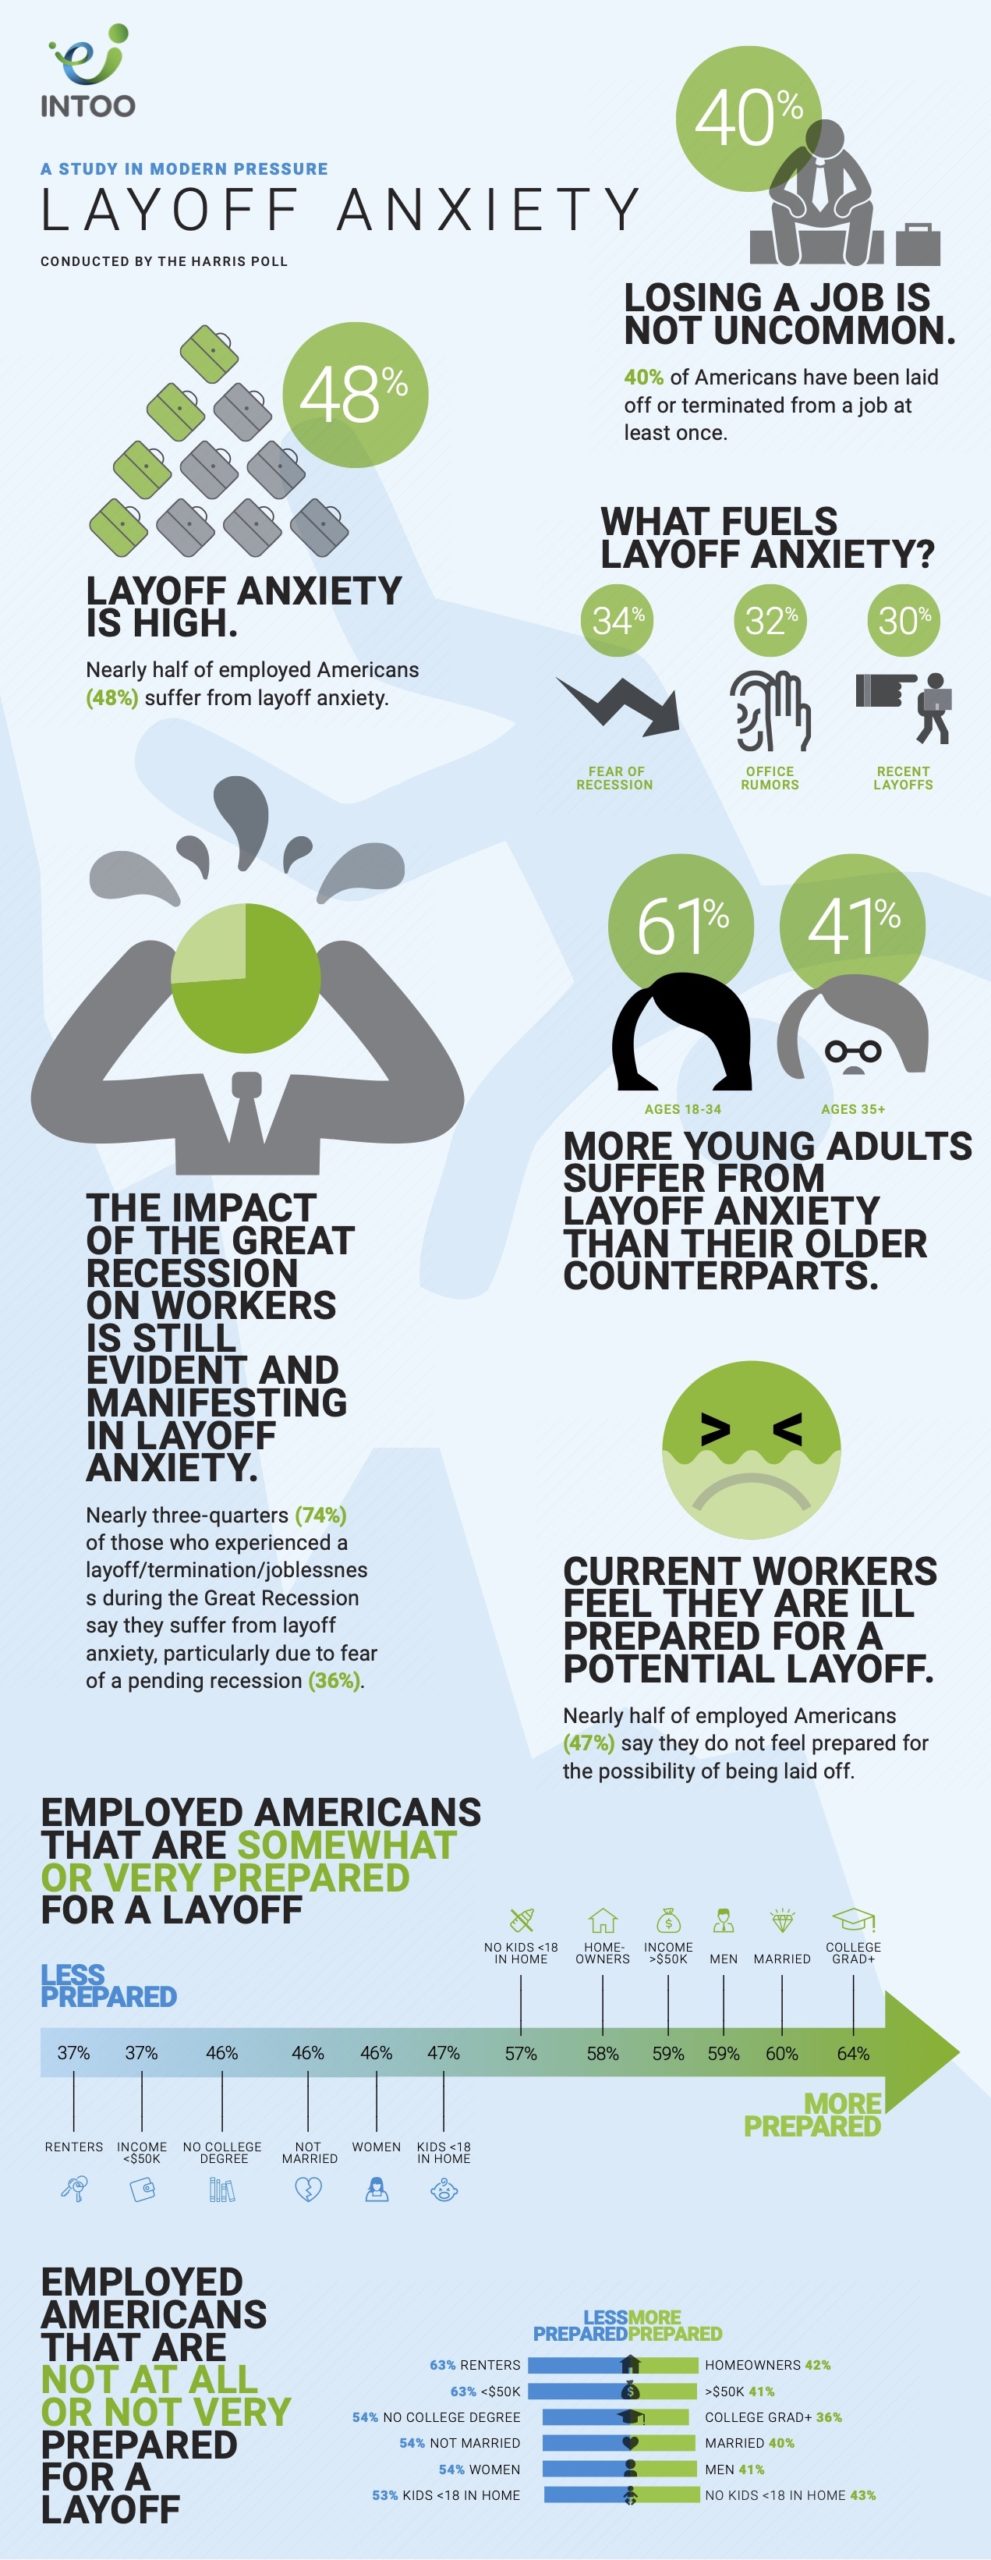 Intoo Layoff Anxiety Study Infographic